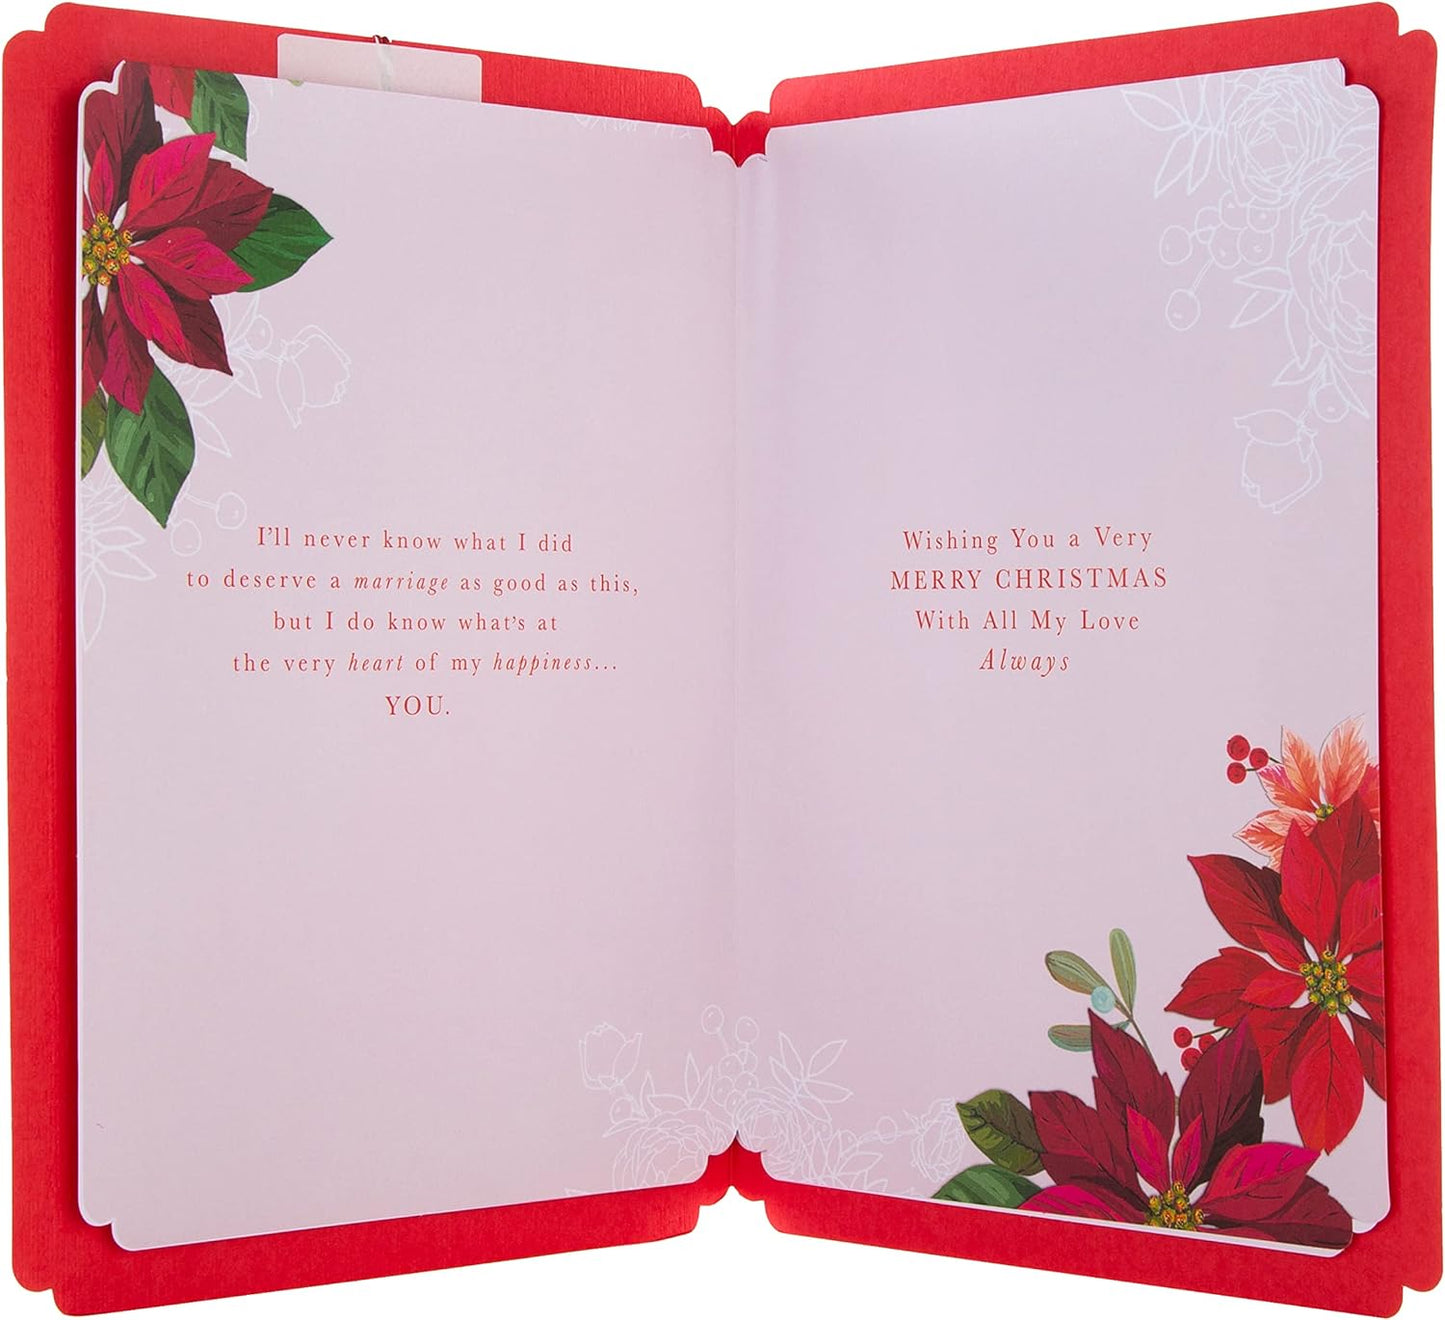 Red Heart Floral Traditional Heart Design with Heartfelt Verse Wife Christmas Card